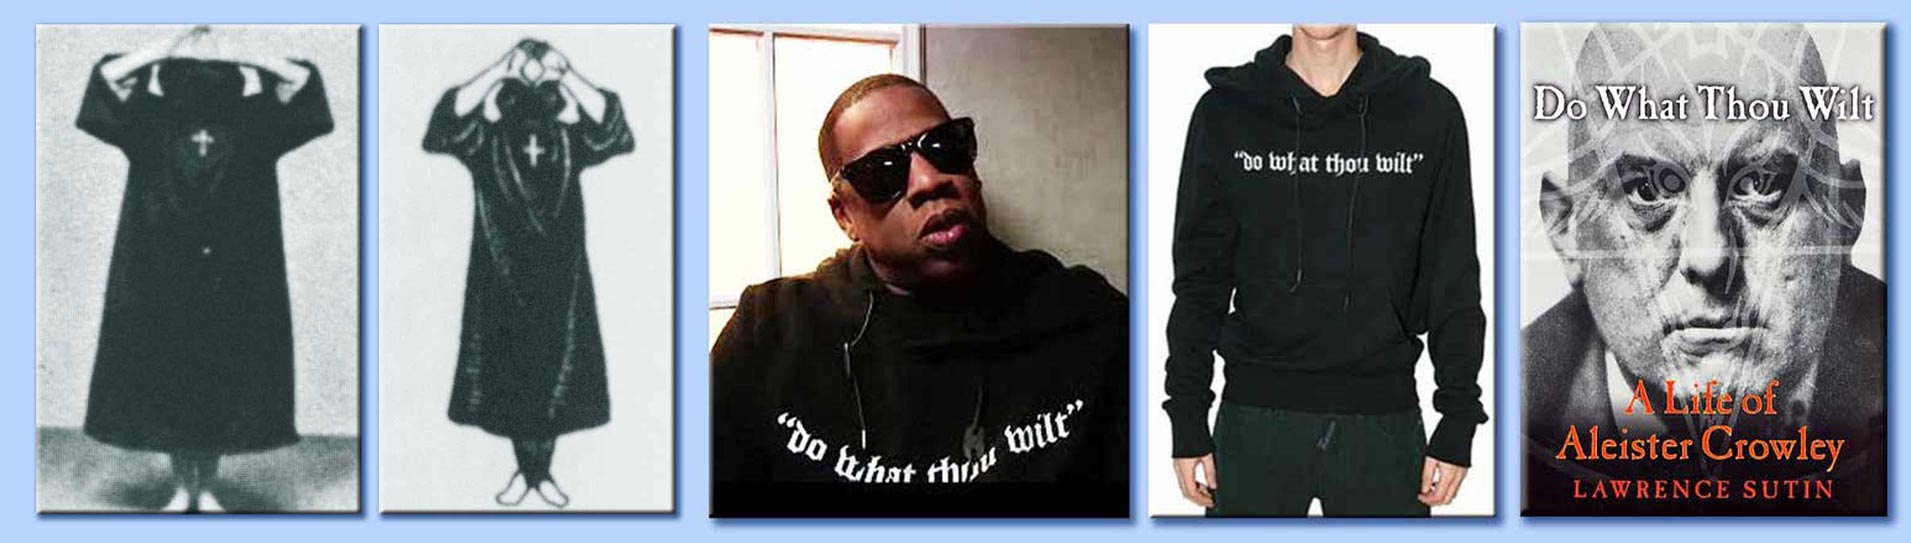 jay-z - aleister crowley